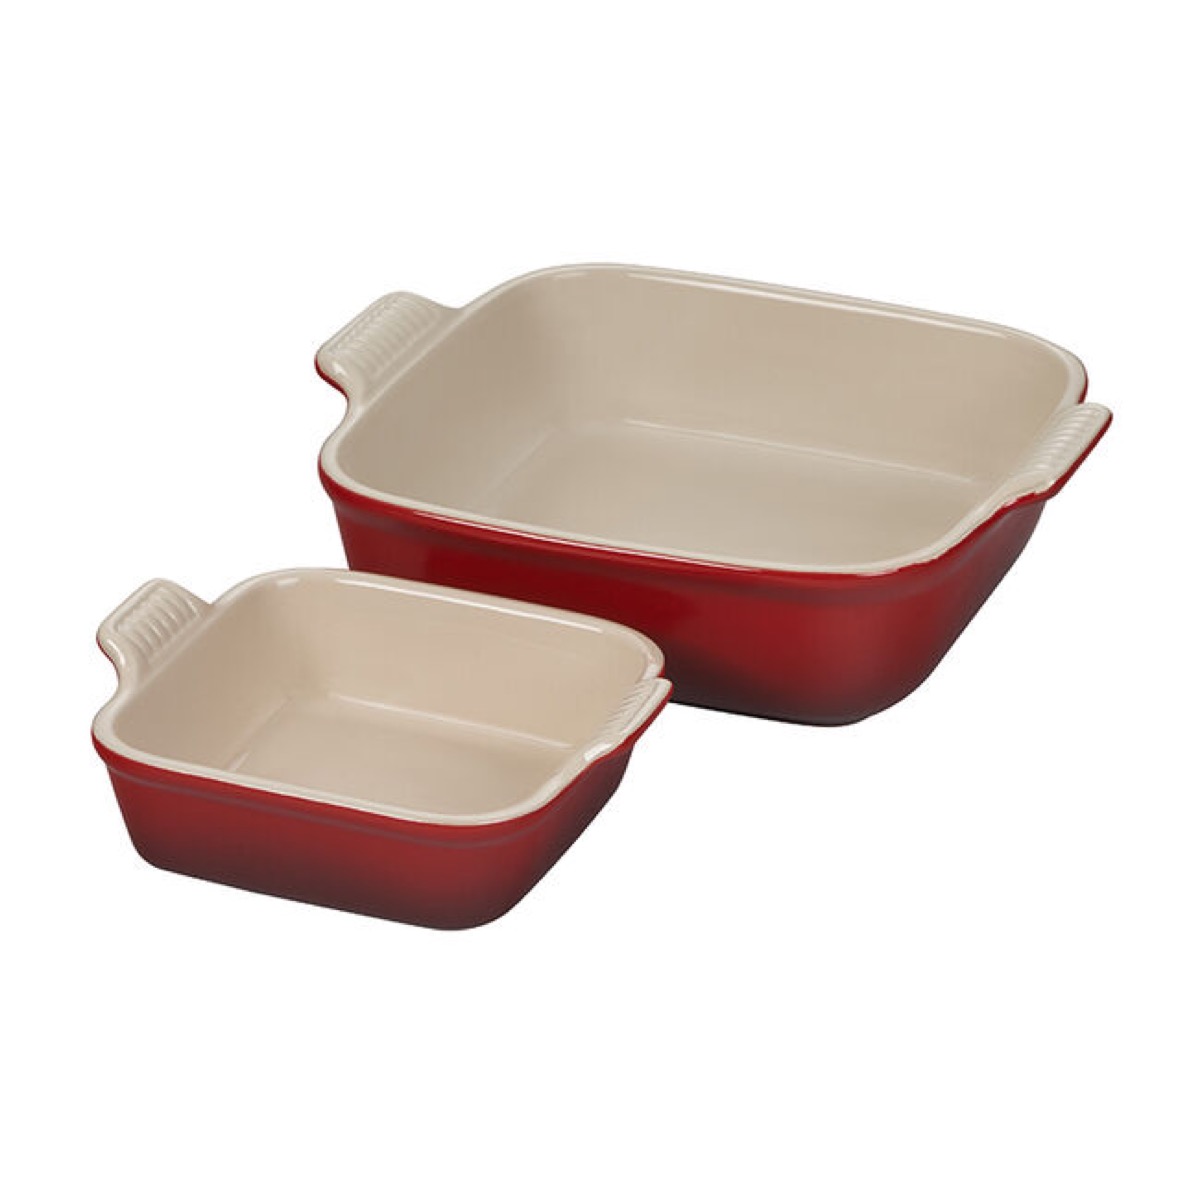 two square red and white ceramic le creuset dishes